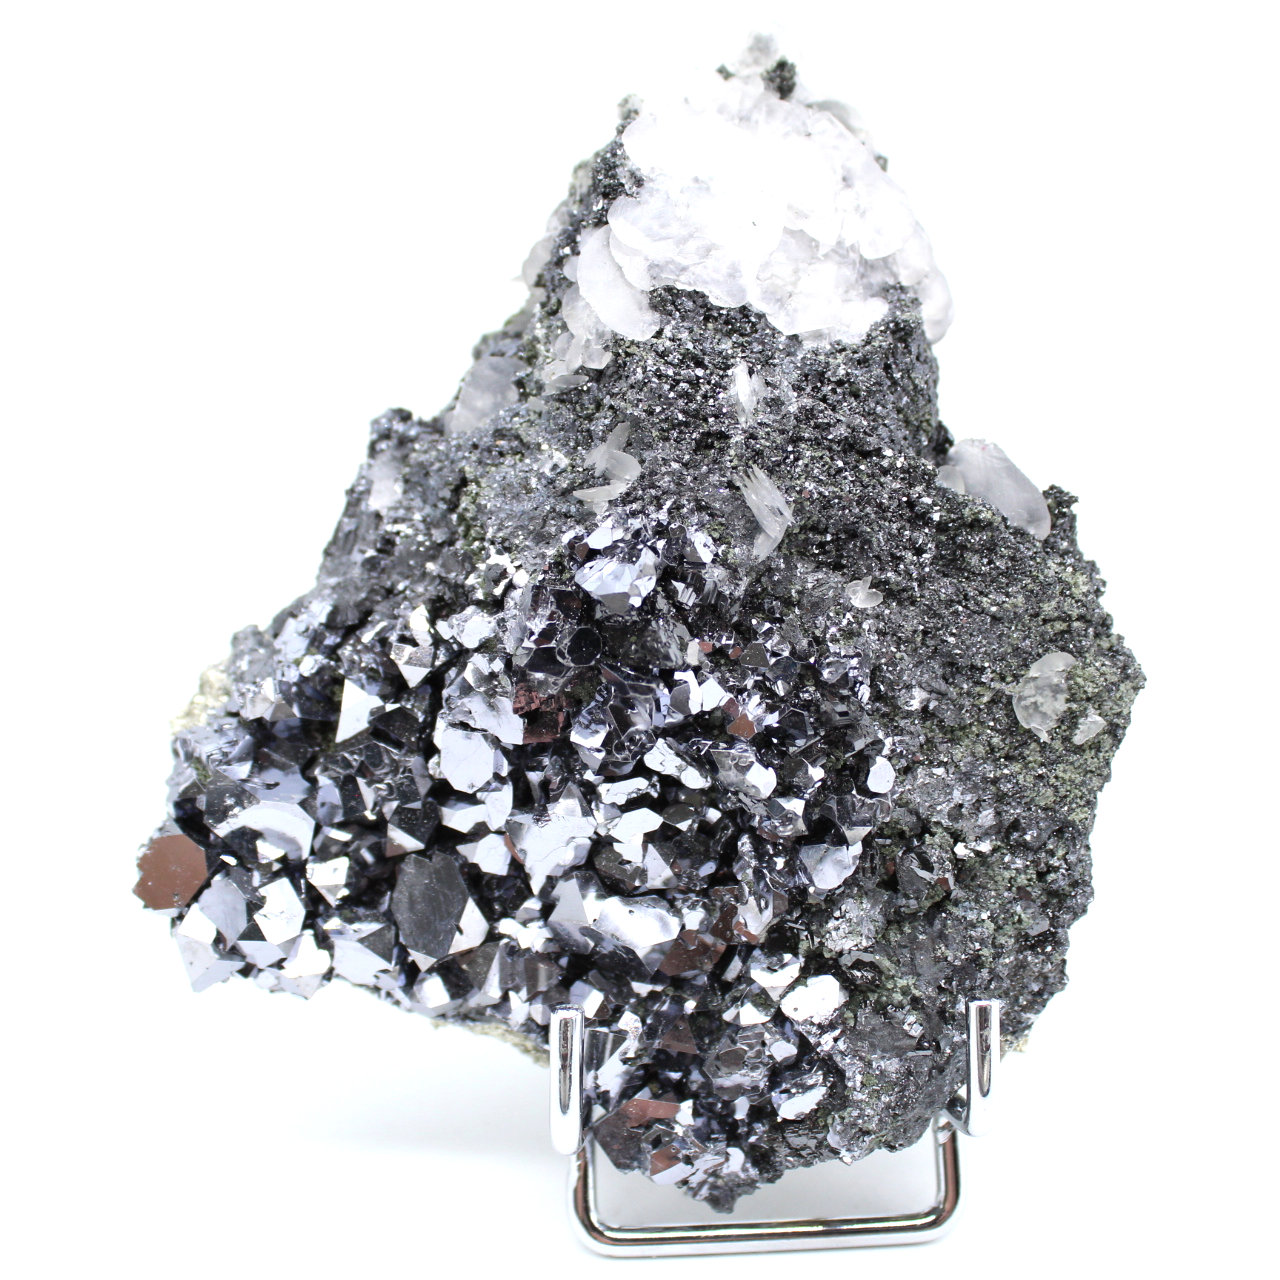 Sphalerite and galena in crystals